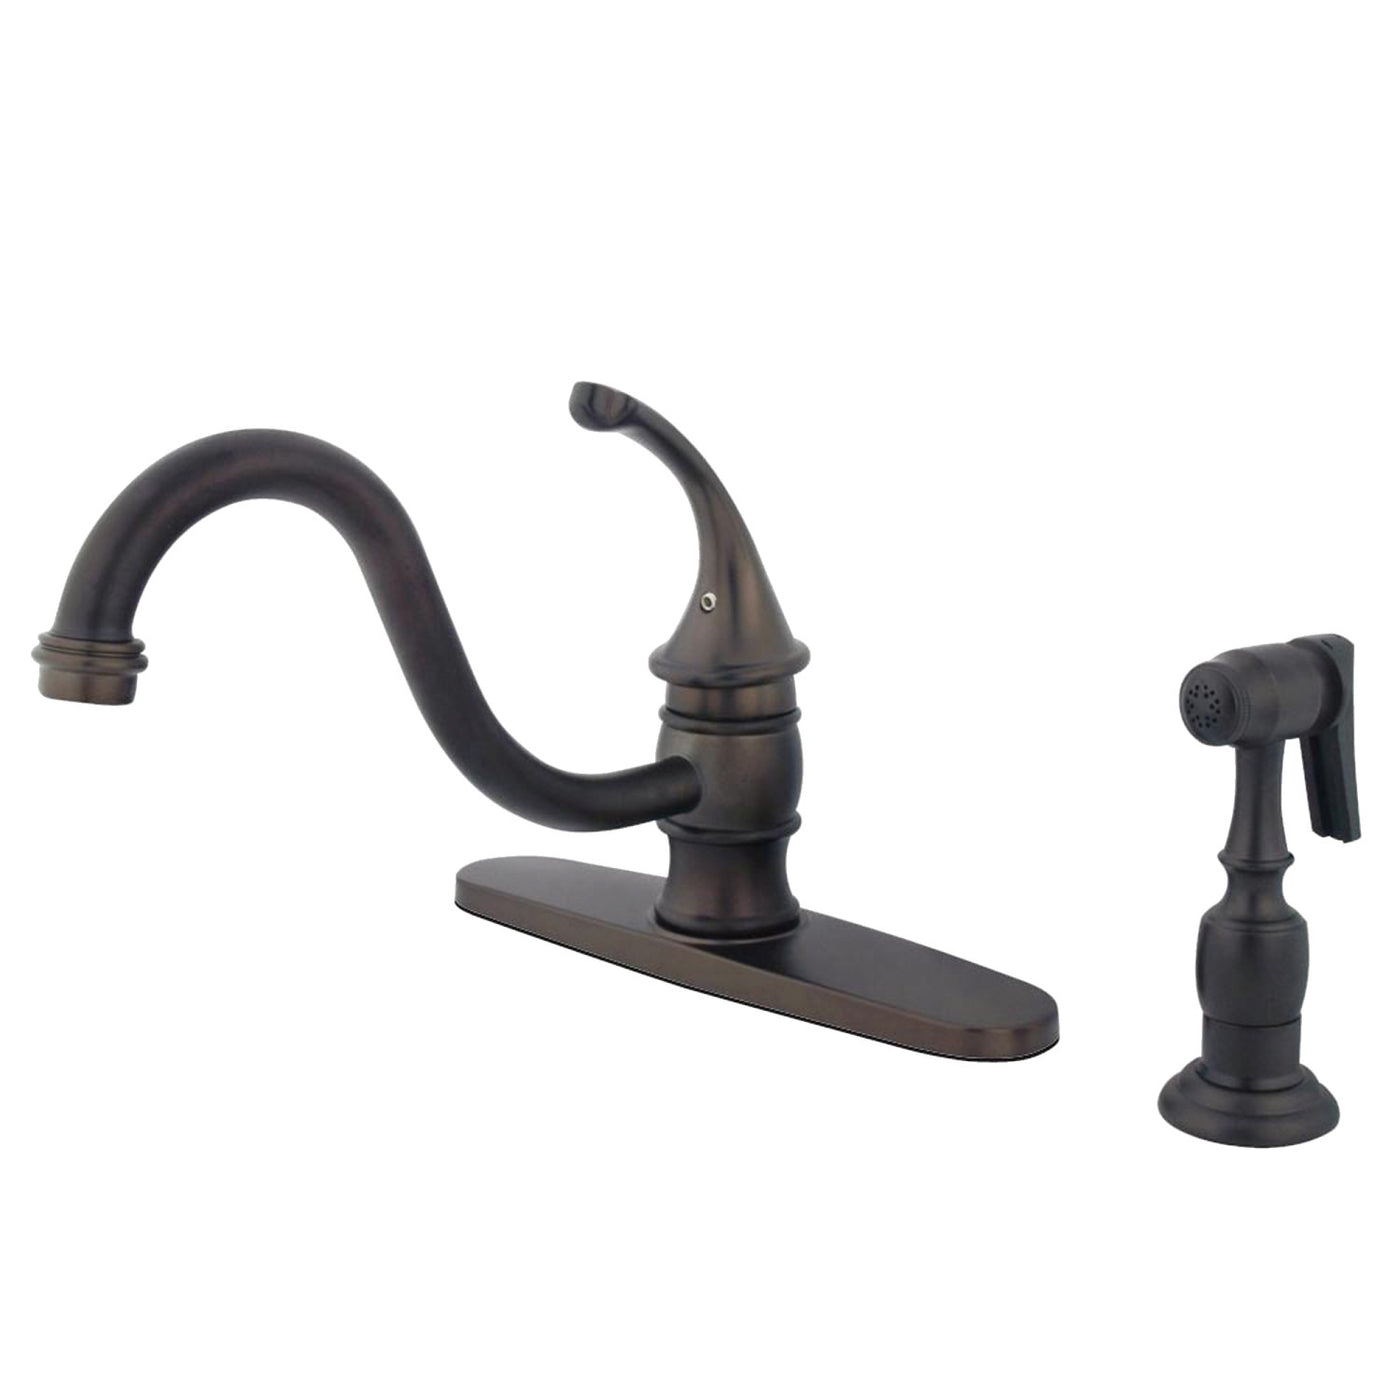 Elements of Design EB3575GLBS Single-Handle Kitchen Faucet with Brass Sprayer, Oil Rubbed Bronze